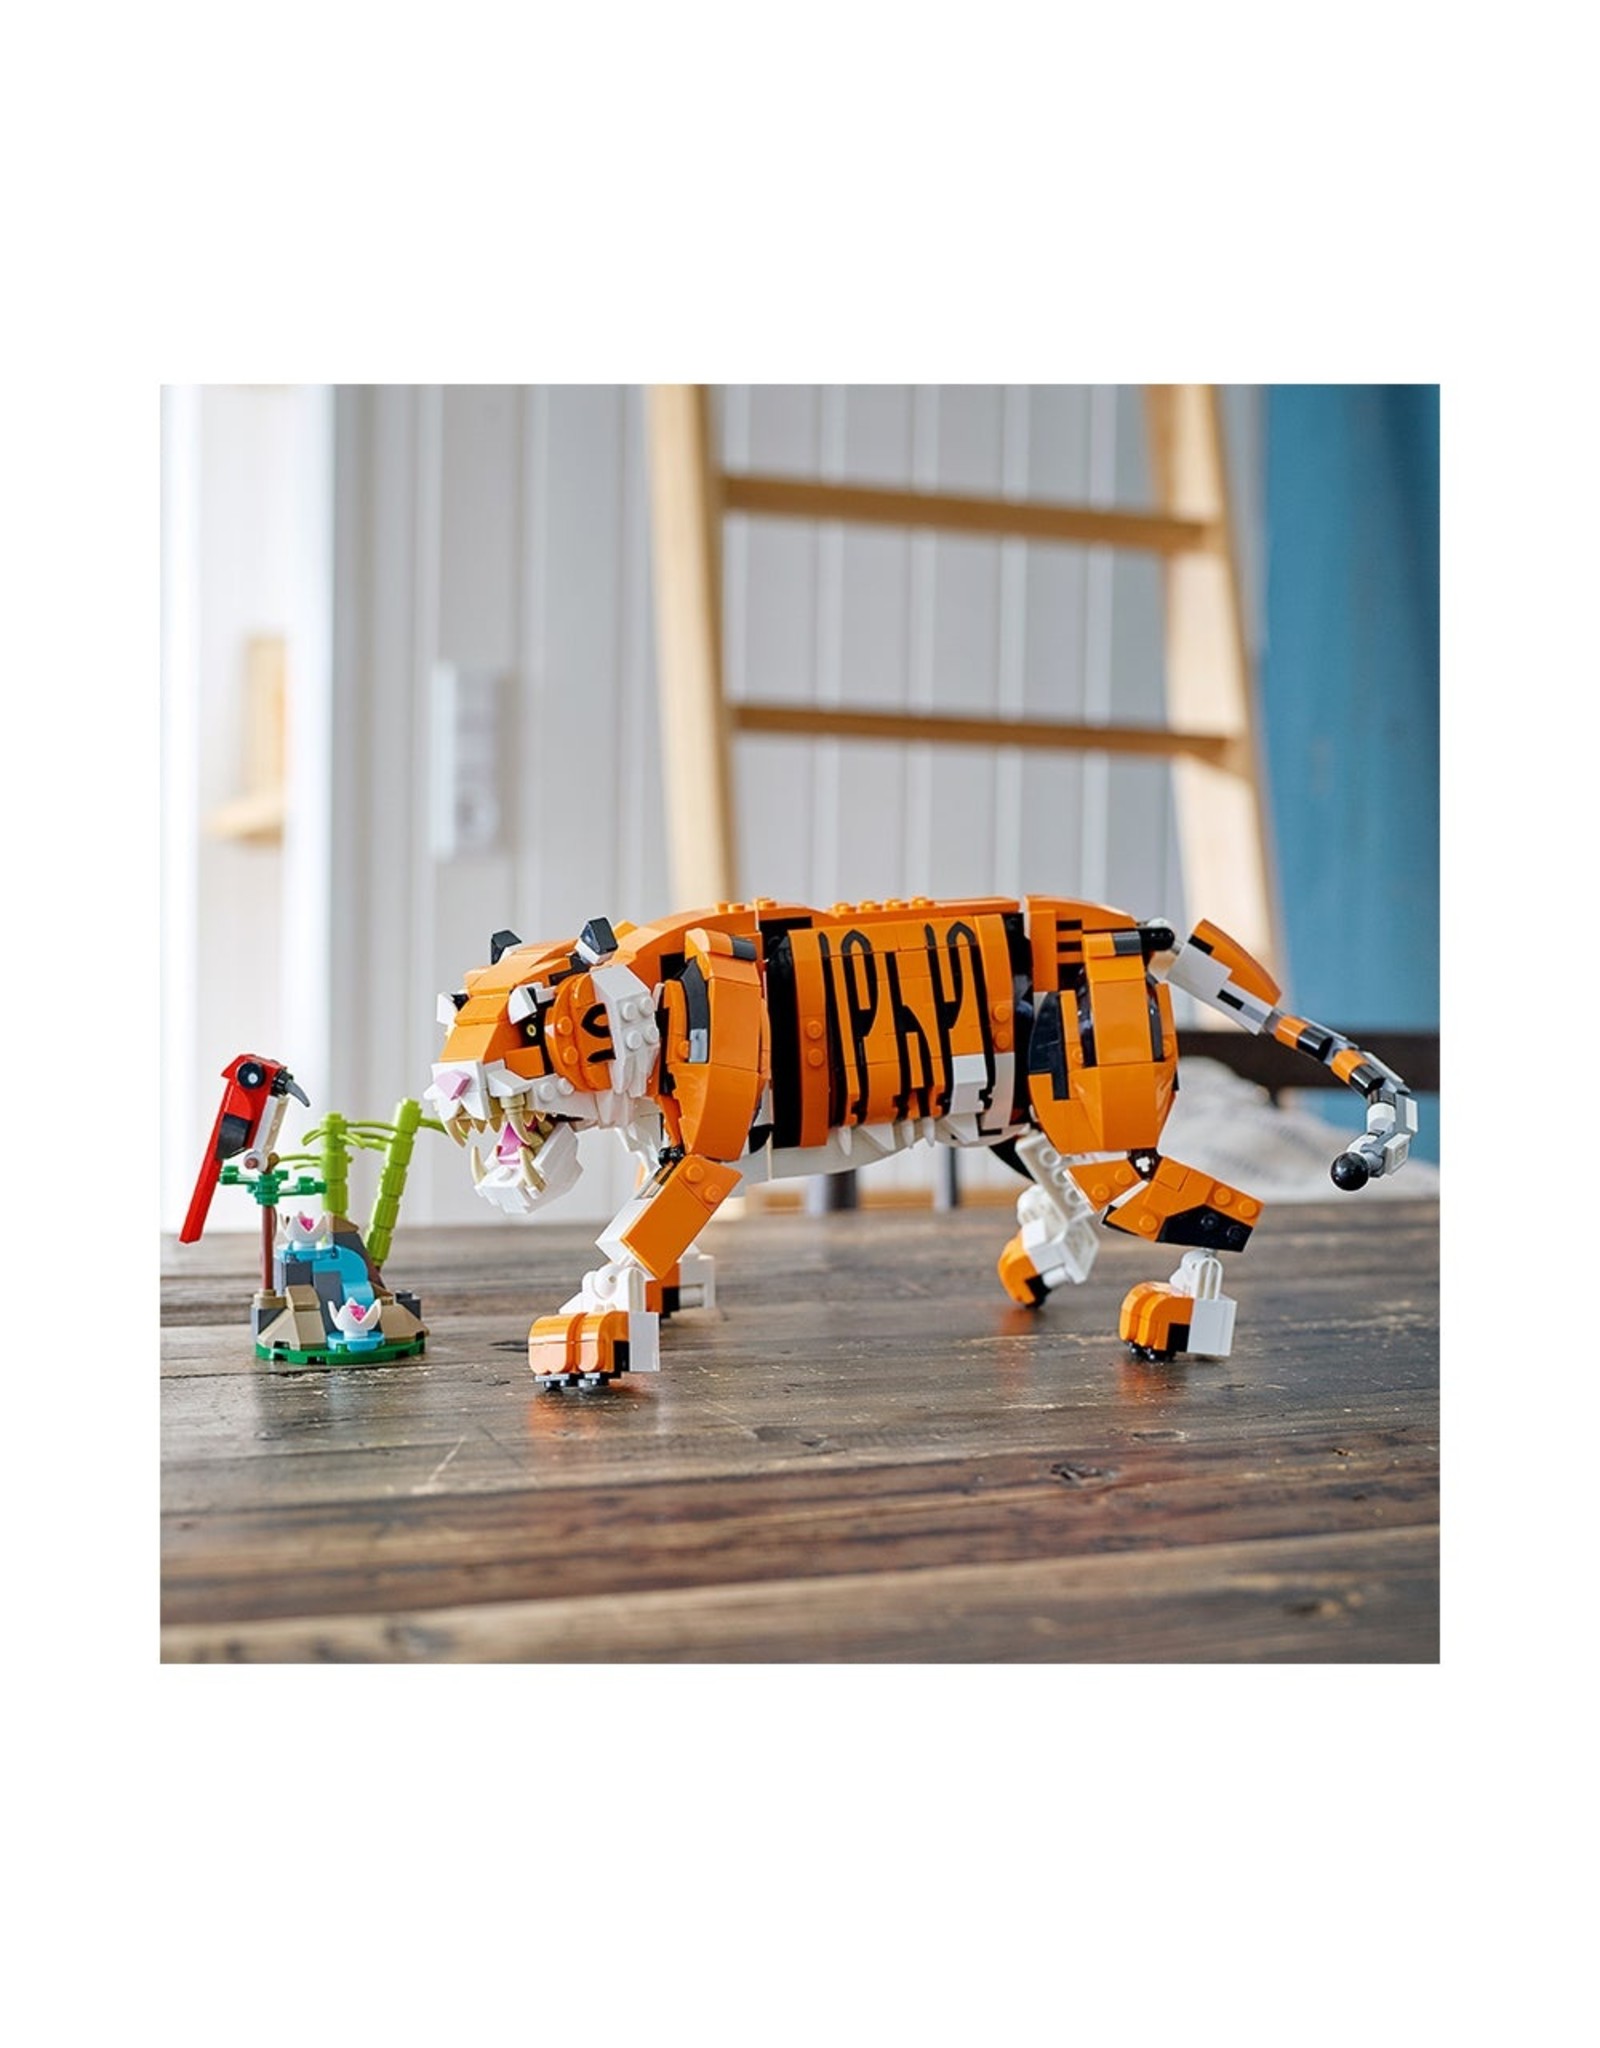 LEGO Creator 3 in 1 Majestic Tiger 31129 Building Kit (755 Pieces)